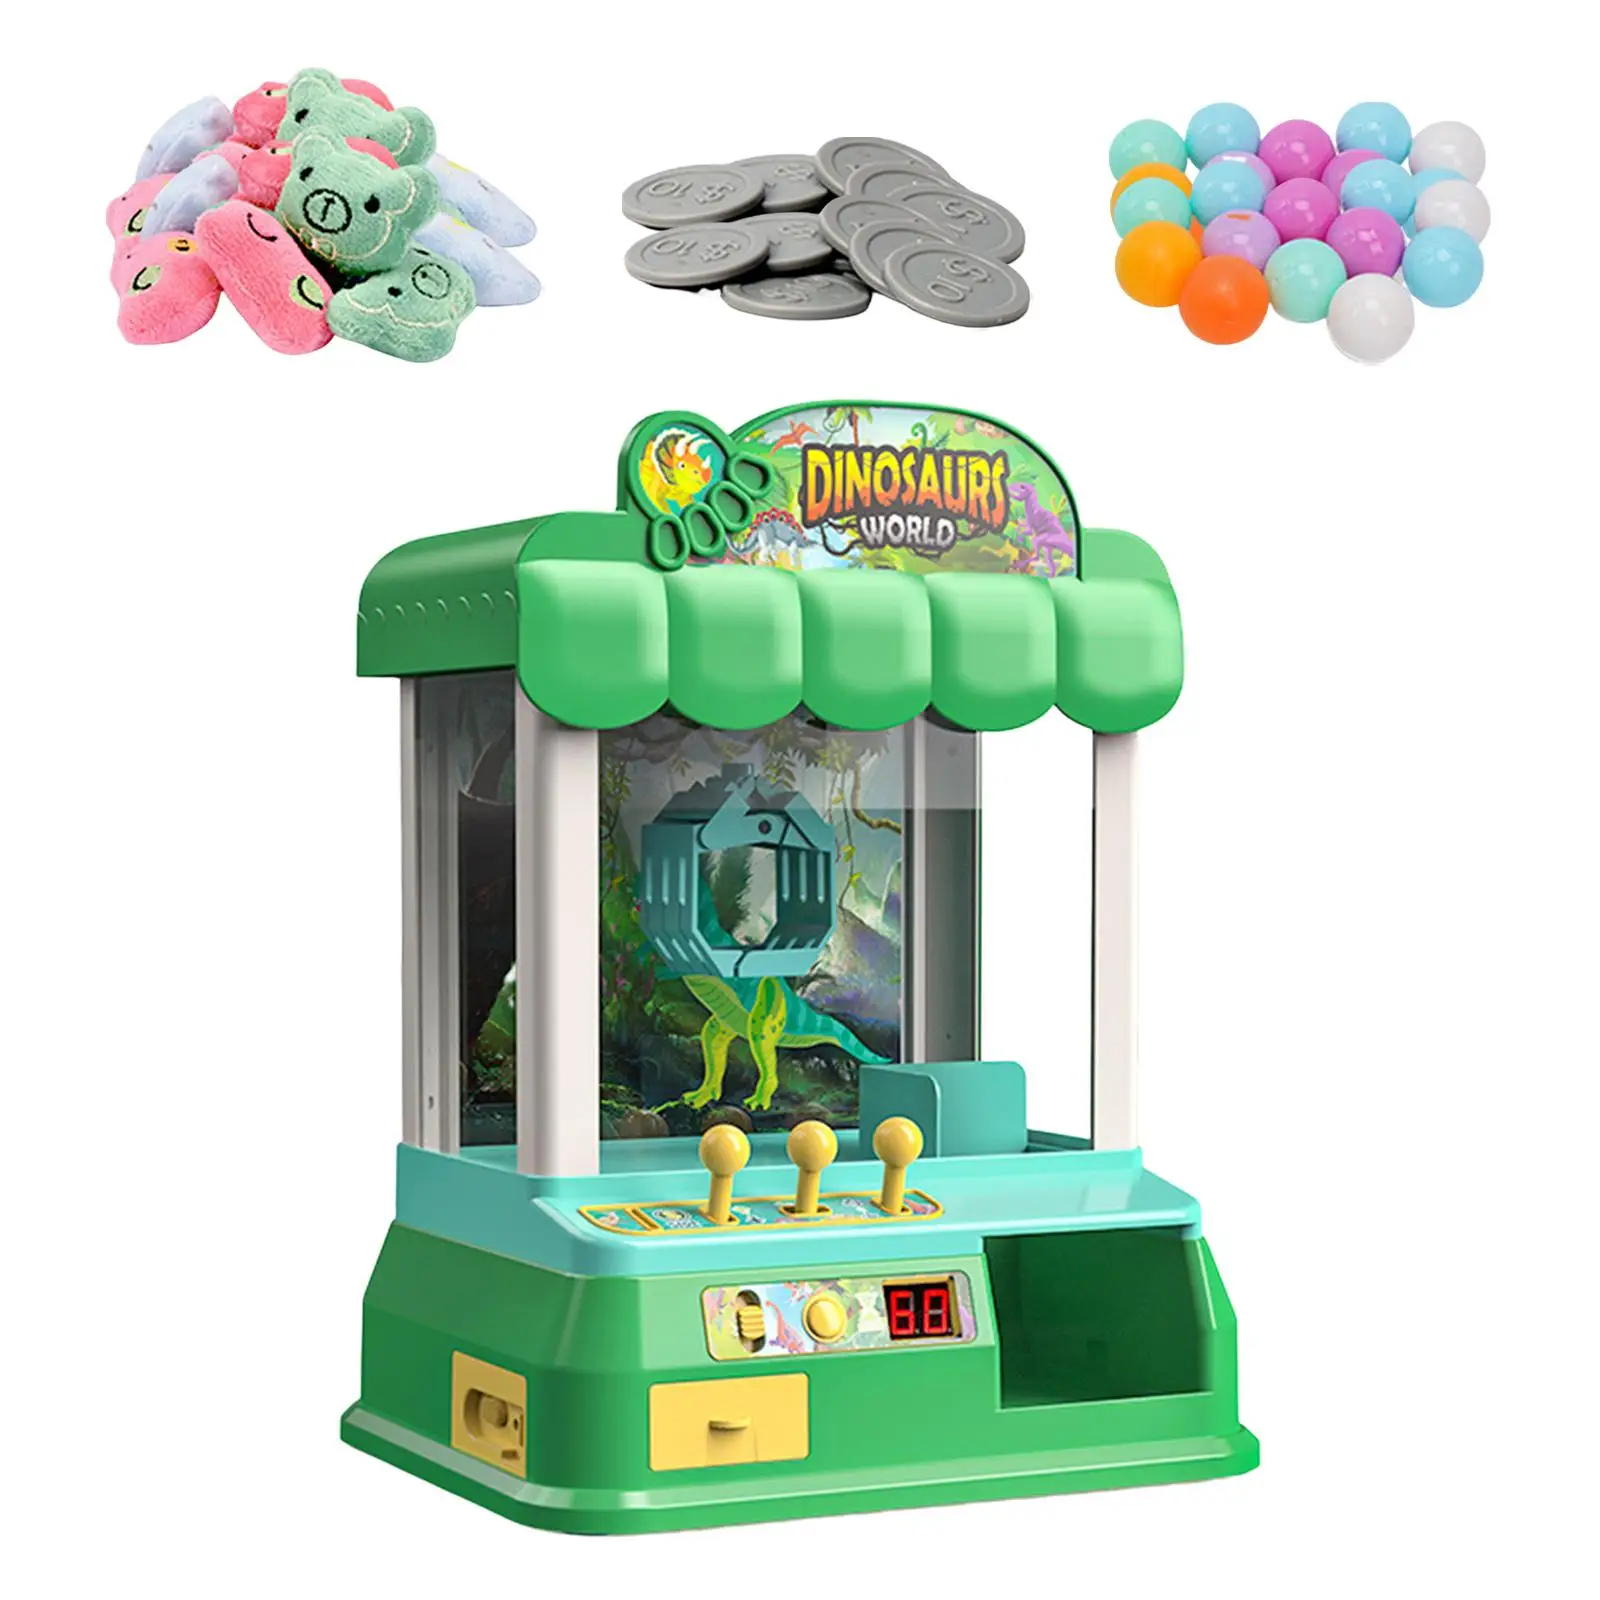 Machine Portable Electronic Arcade Game for Boys Girls Kids Adults